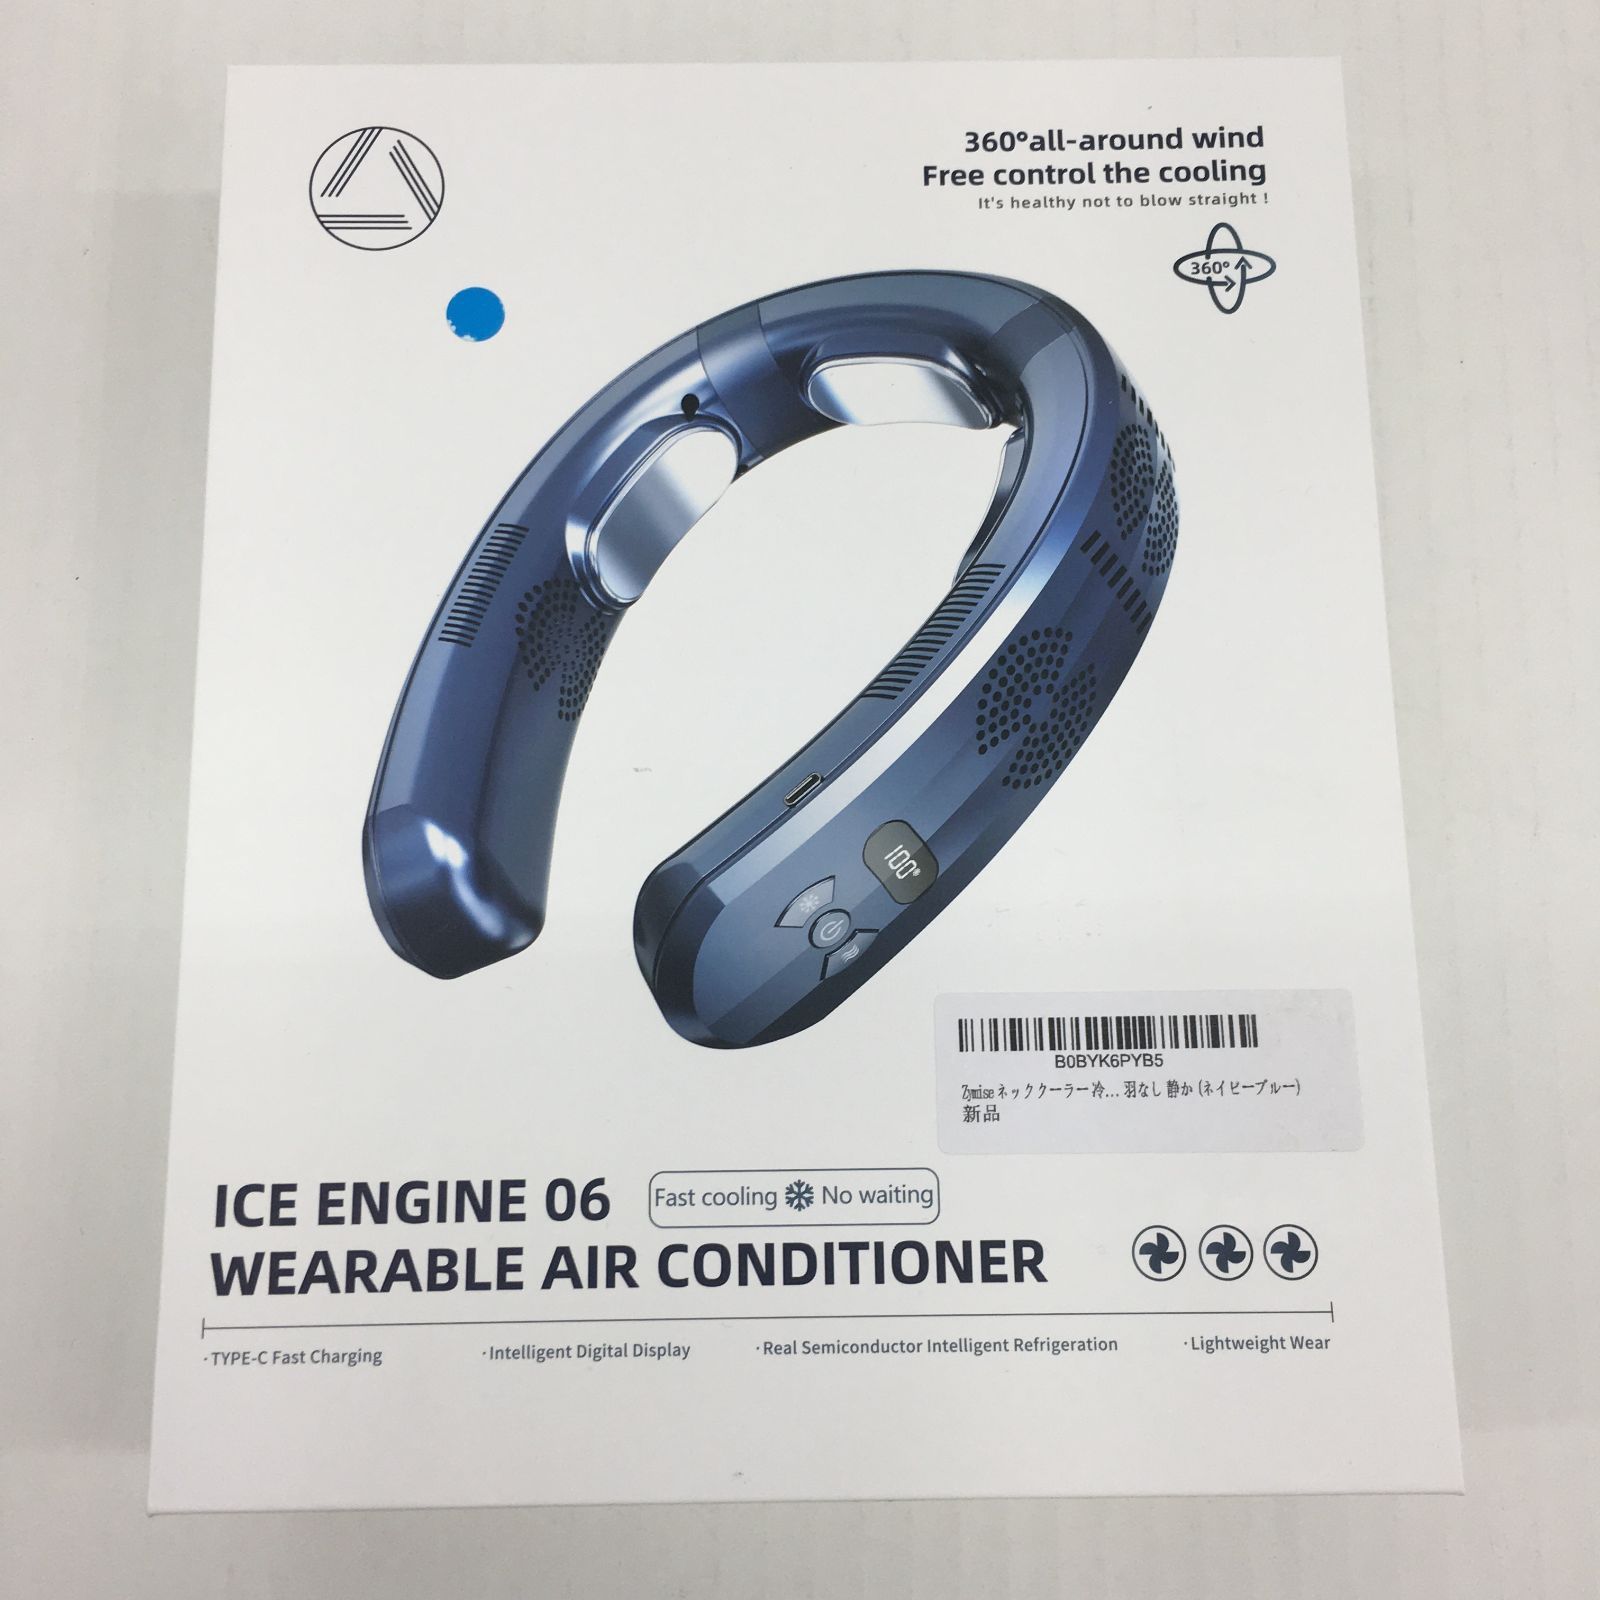 ICE ENGINE 06 WEARABLE AIR CONDITIONER